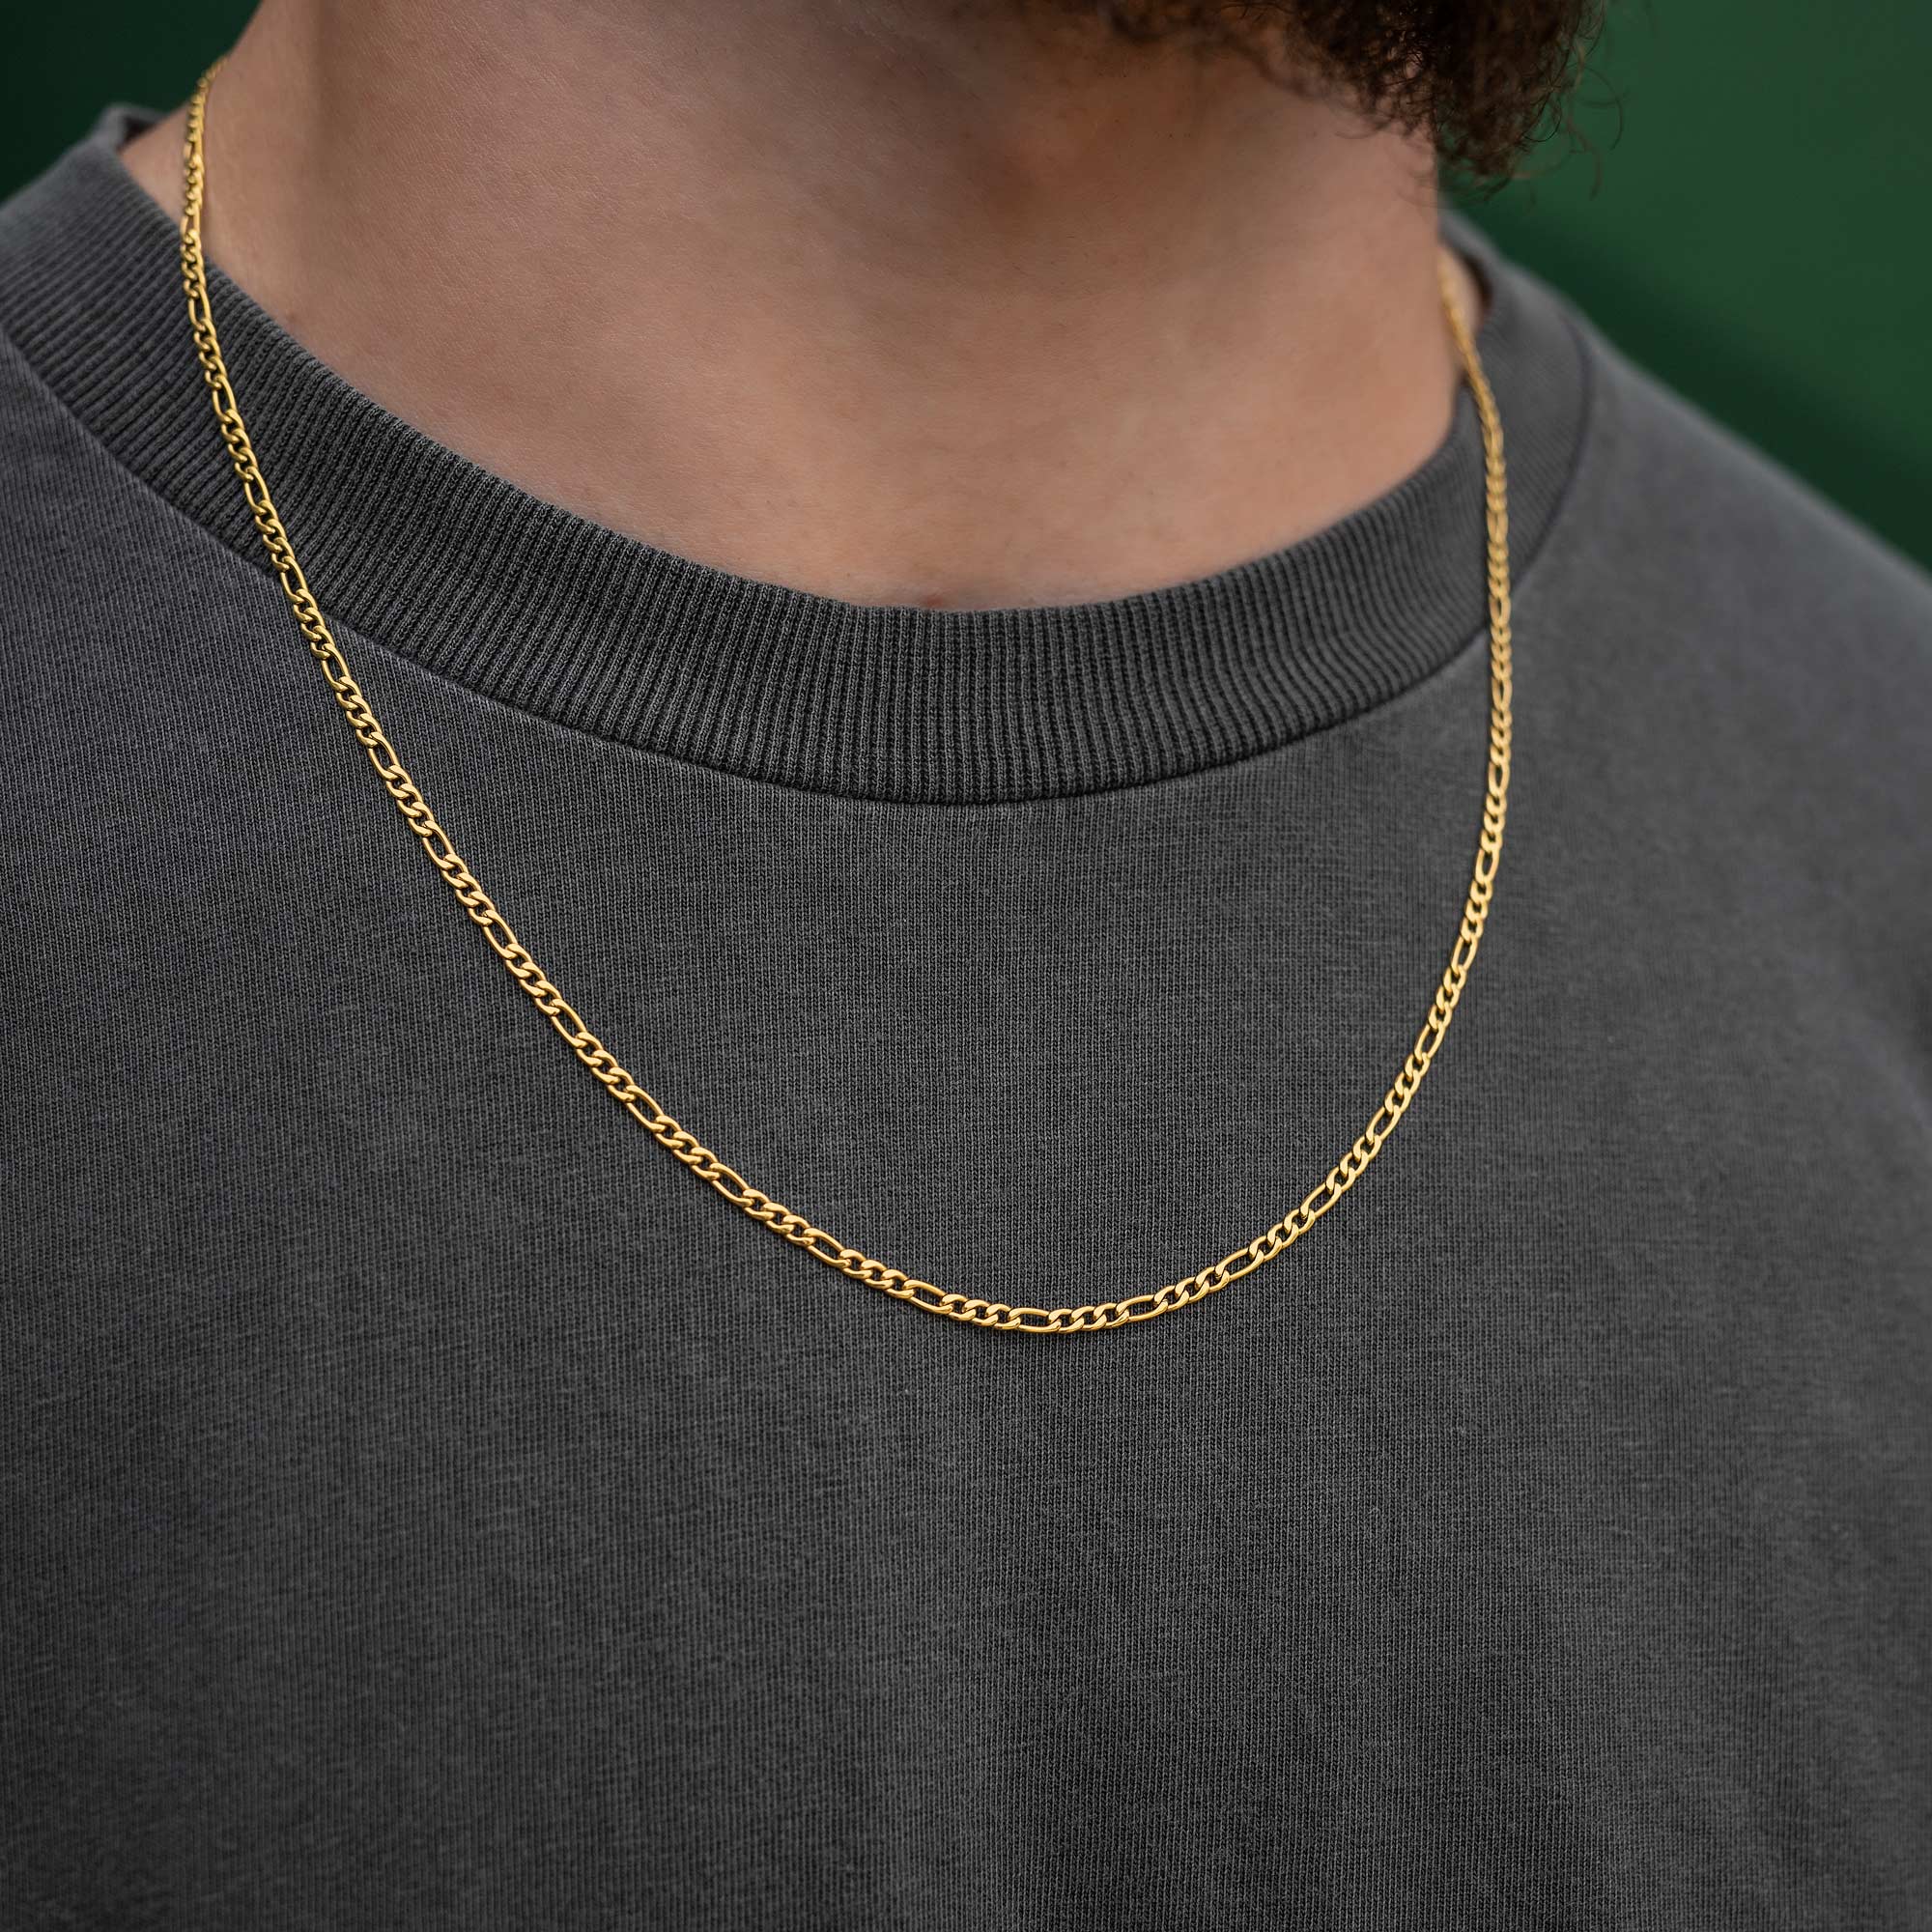 Small Figaro Chain Necklace (Gold)